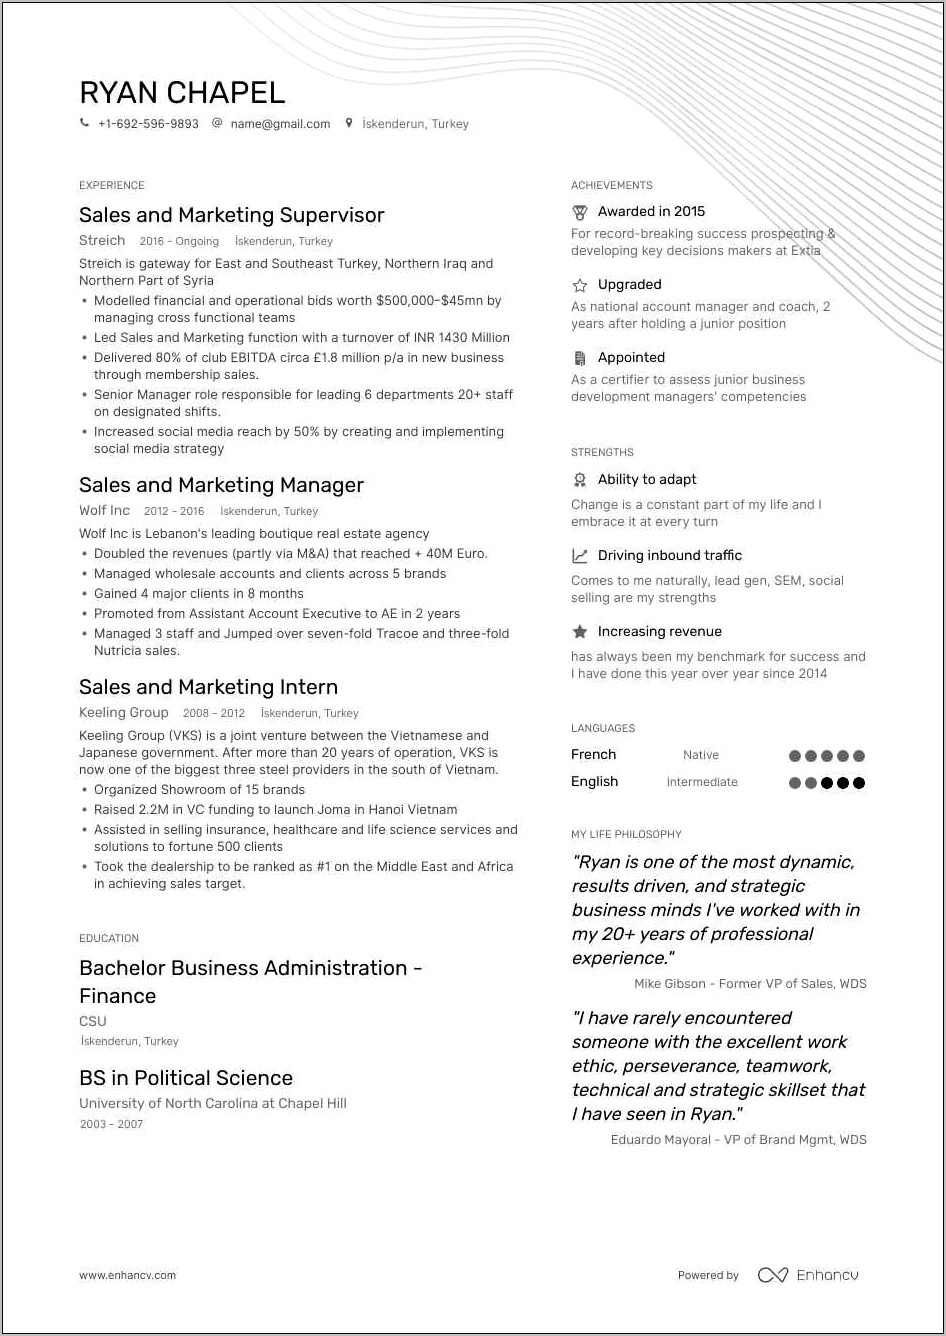 Resume Objective For Marketing Sales Intern